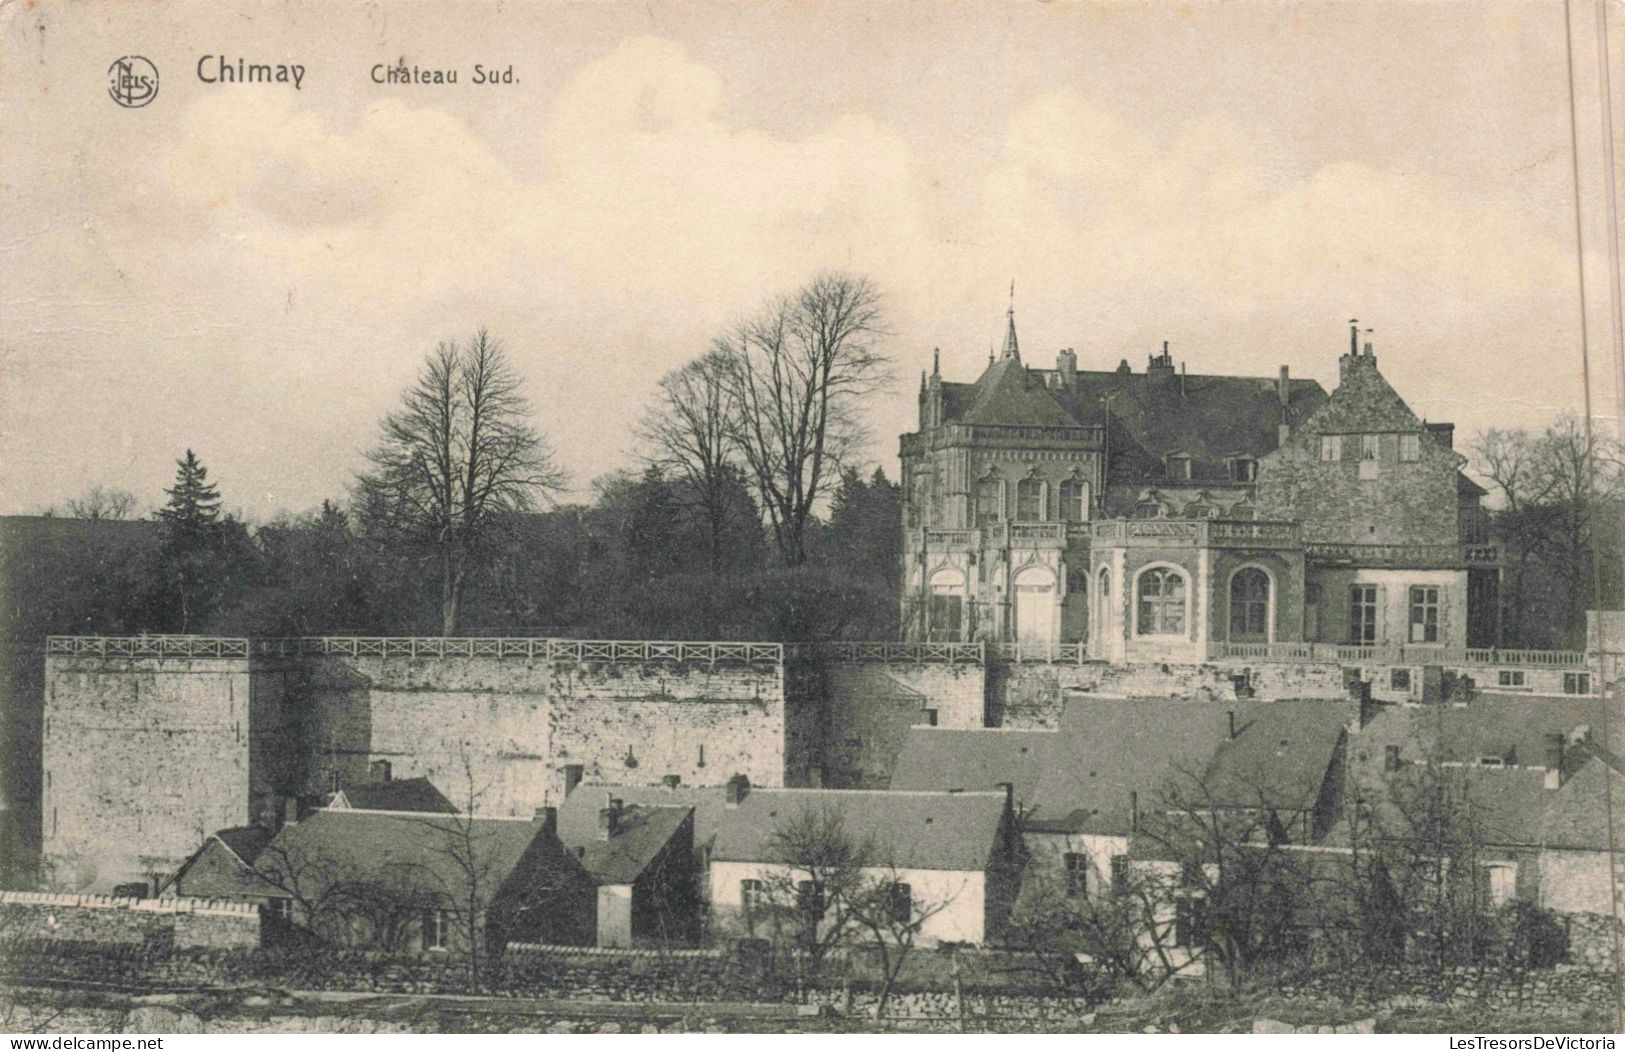 FRANCE - Chimay - Château Sud - Carte Postale Ancienne - Chimay